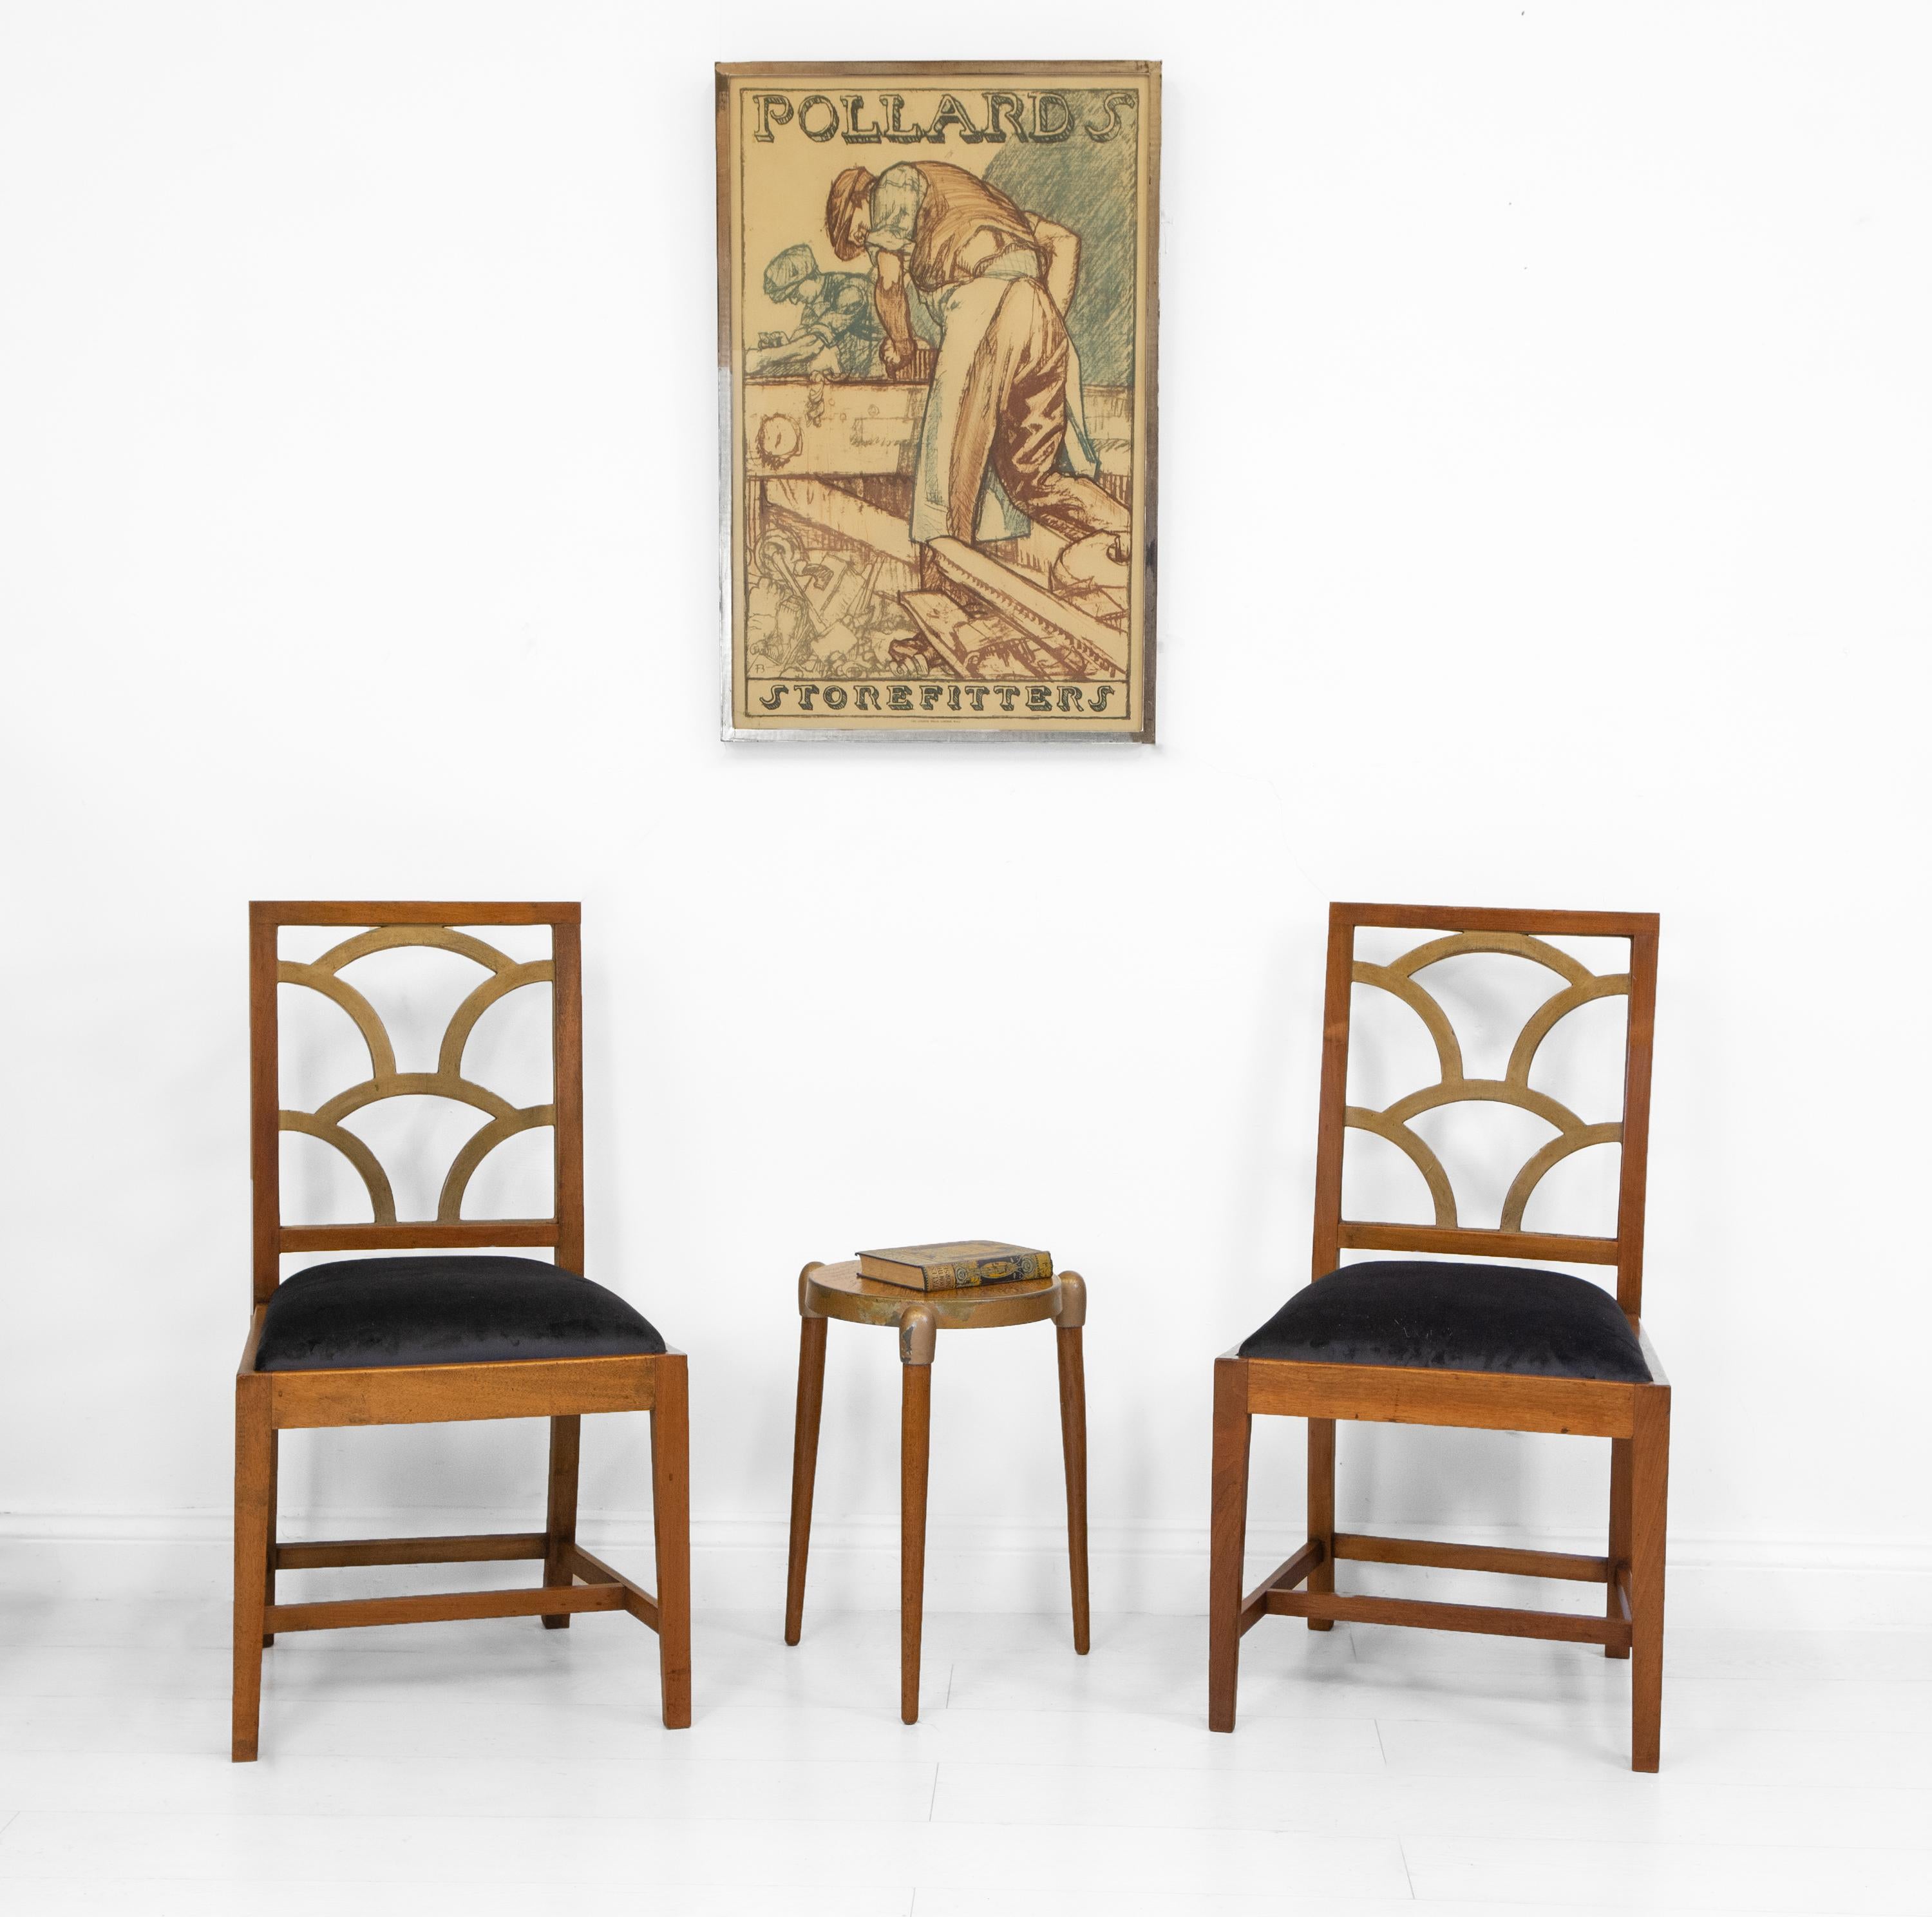 English Rowley Gallery Art Deco Pair Of  Walnut Cloud Form Back Side Chairs 1930's For Sale